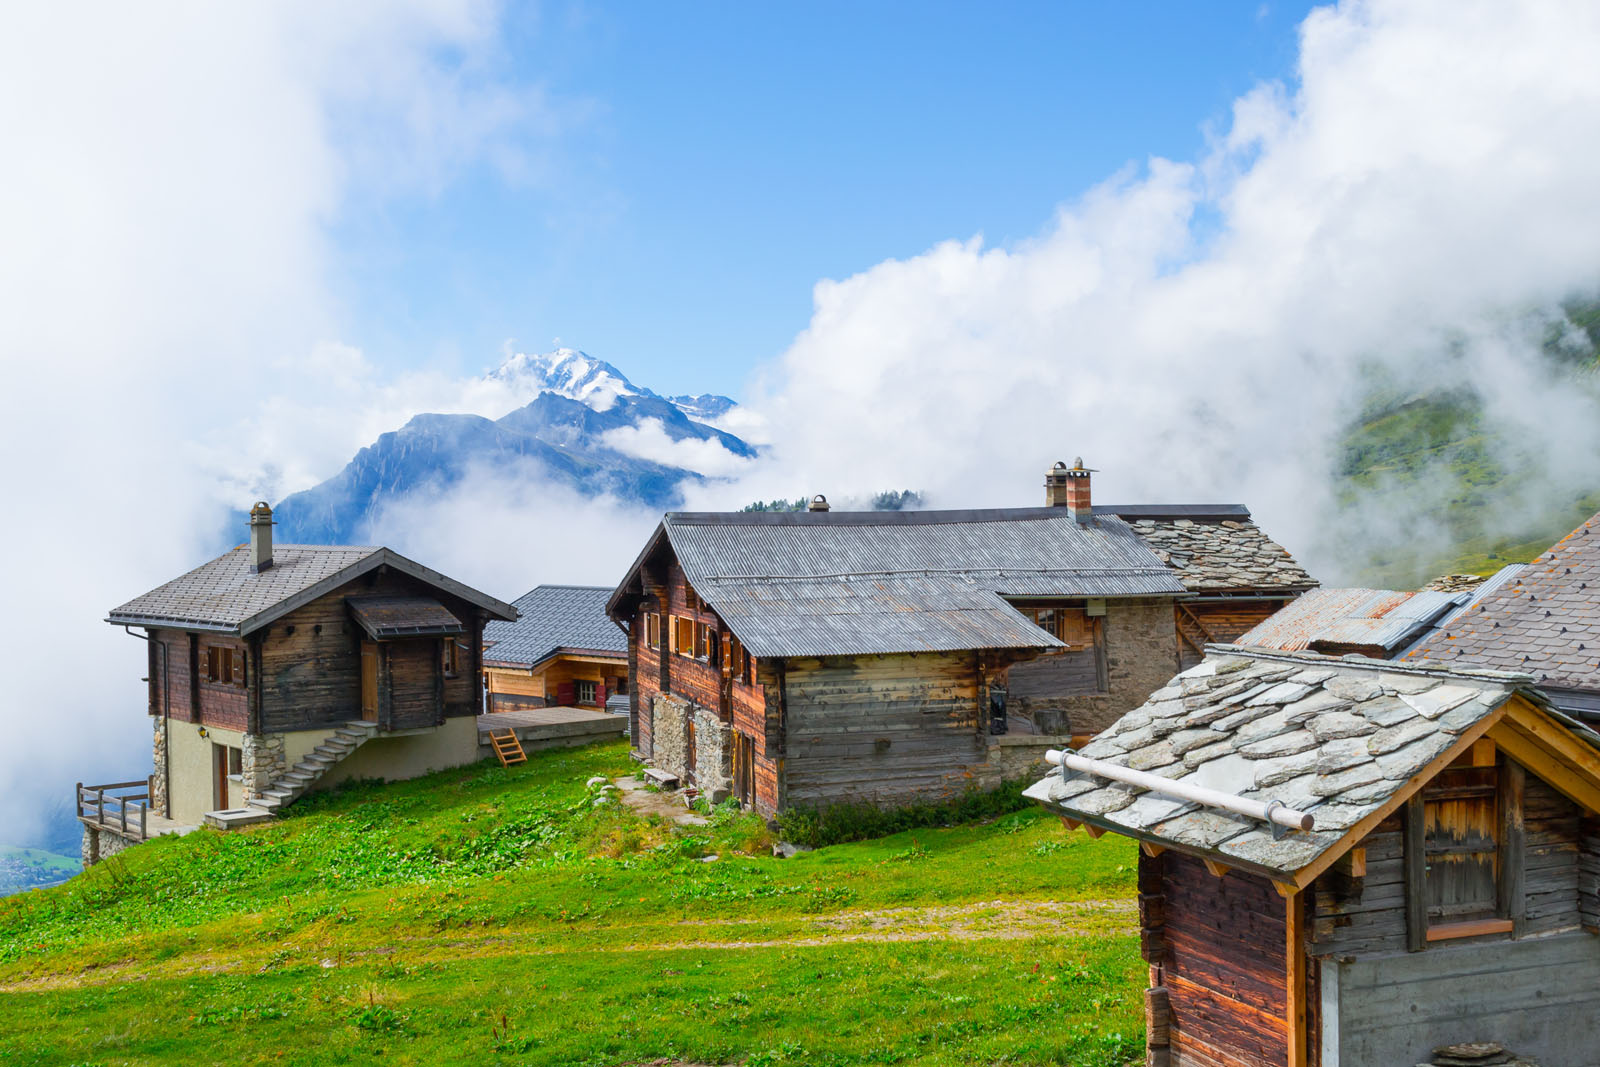 Belalp village in fog. Wooden houses and buildings in old style,